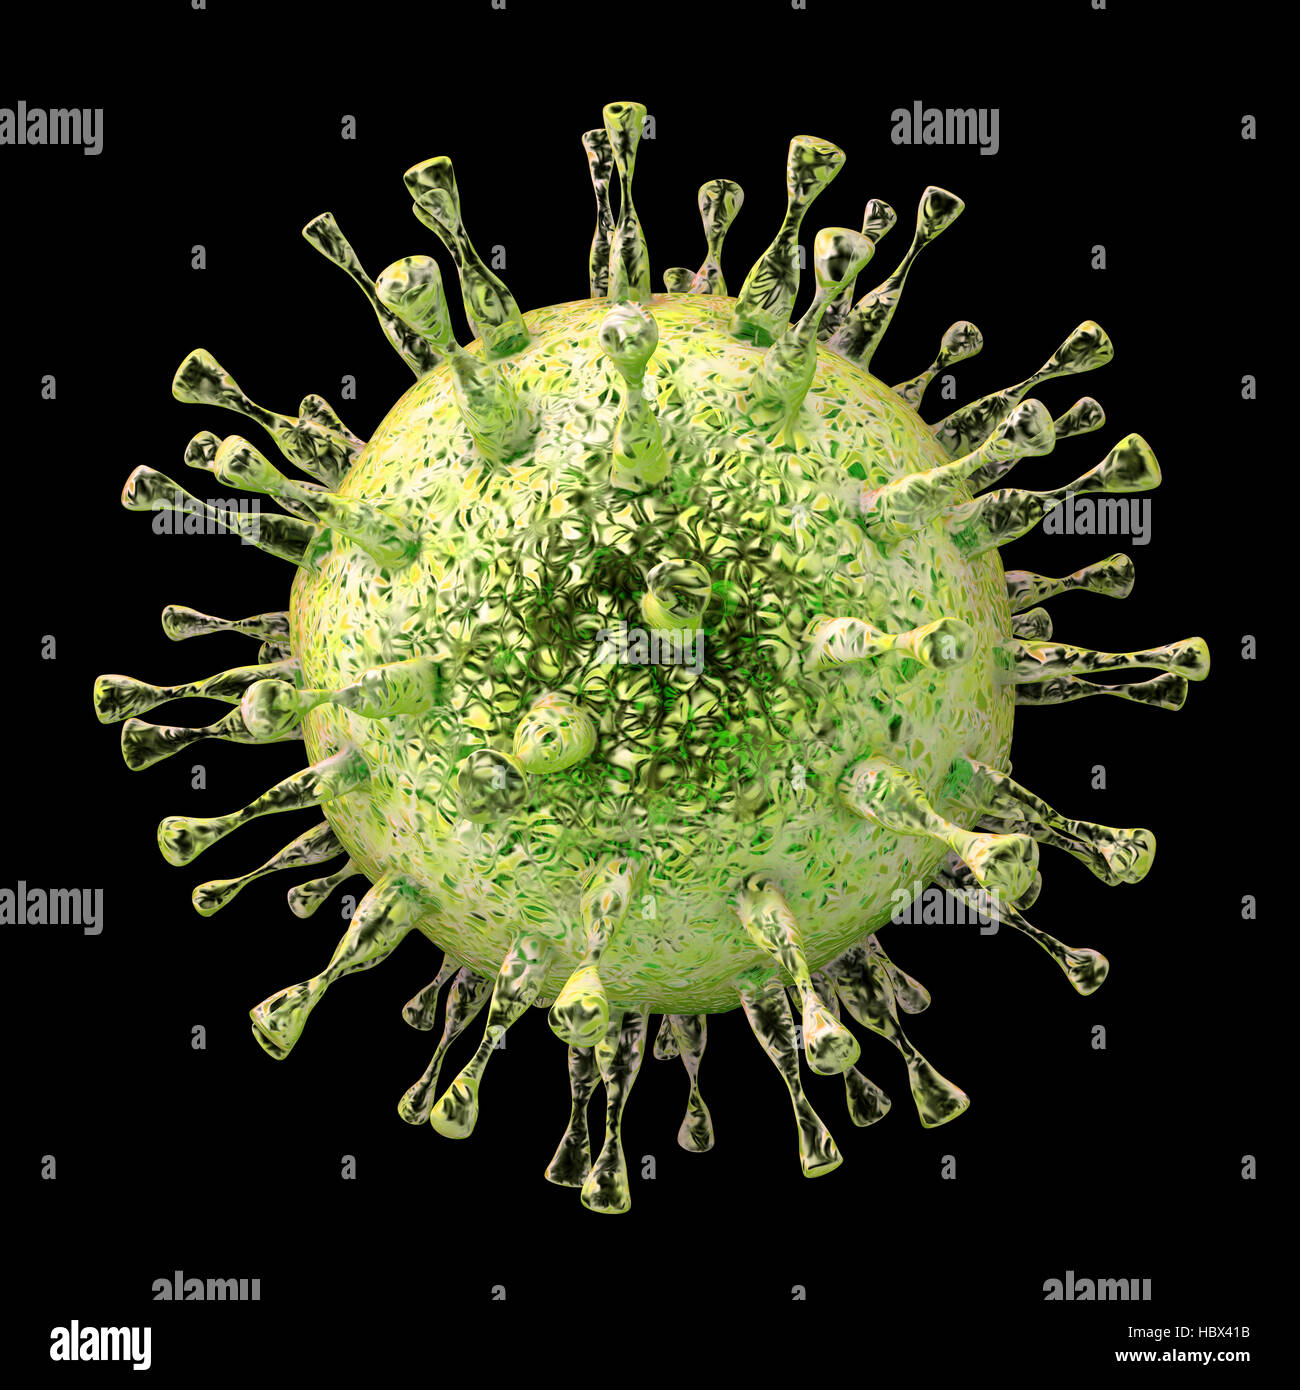 Human cytomegalovirus (HCMV), computer illustration. HCMV is a member of the herpesvirus family. It has a high infection rate and is a major cause of disease in vulnerable newborns and immunocompromised patients, but does not typically cause disease in healthy adults. Stock Photo